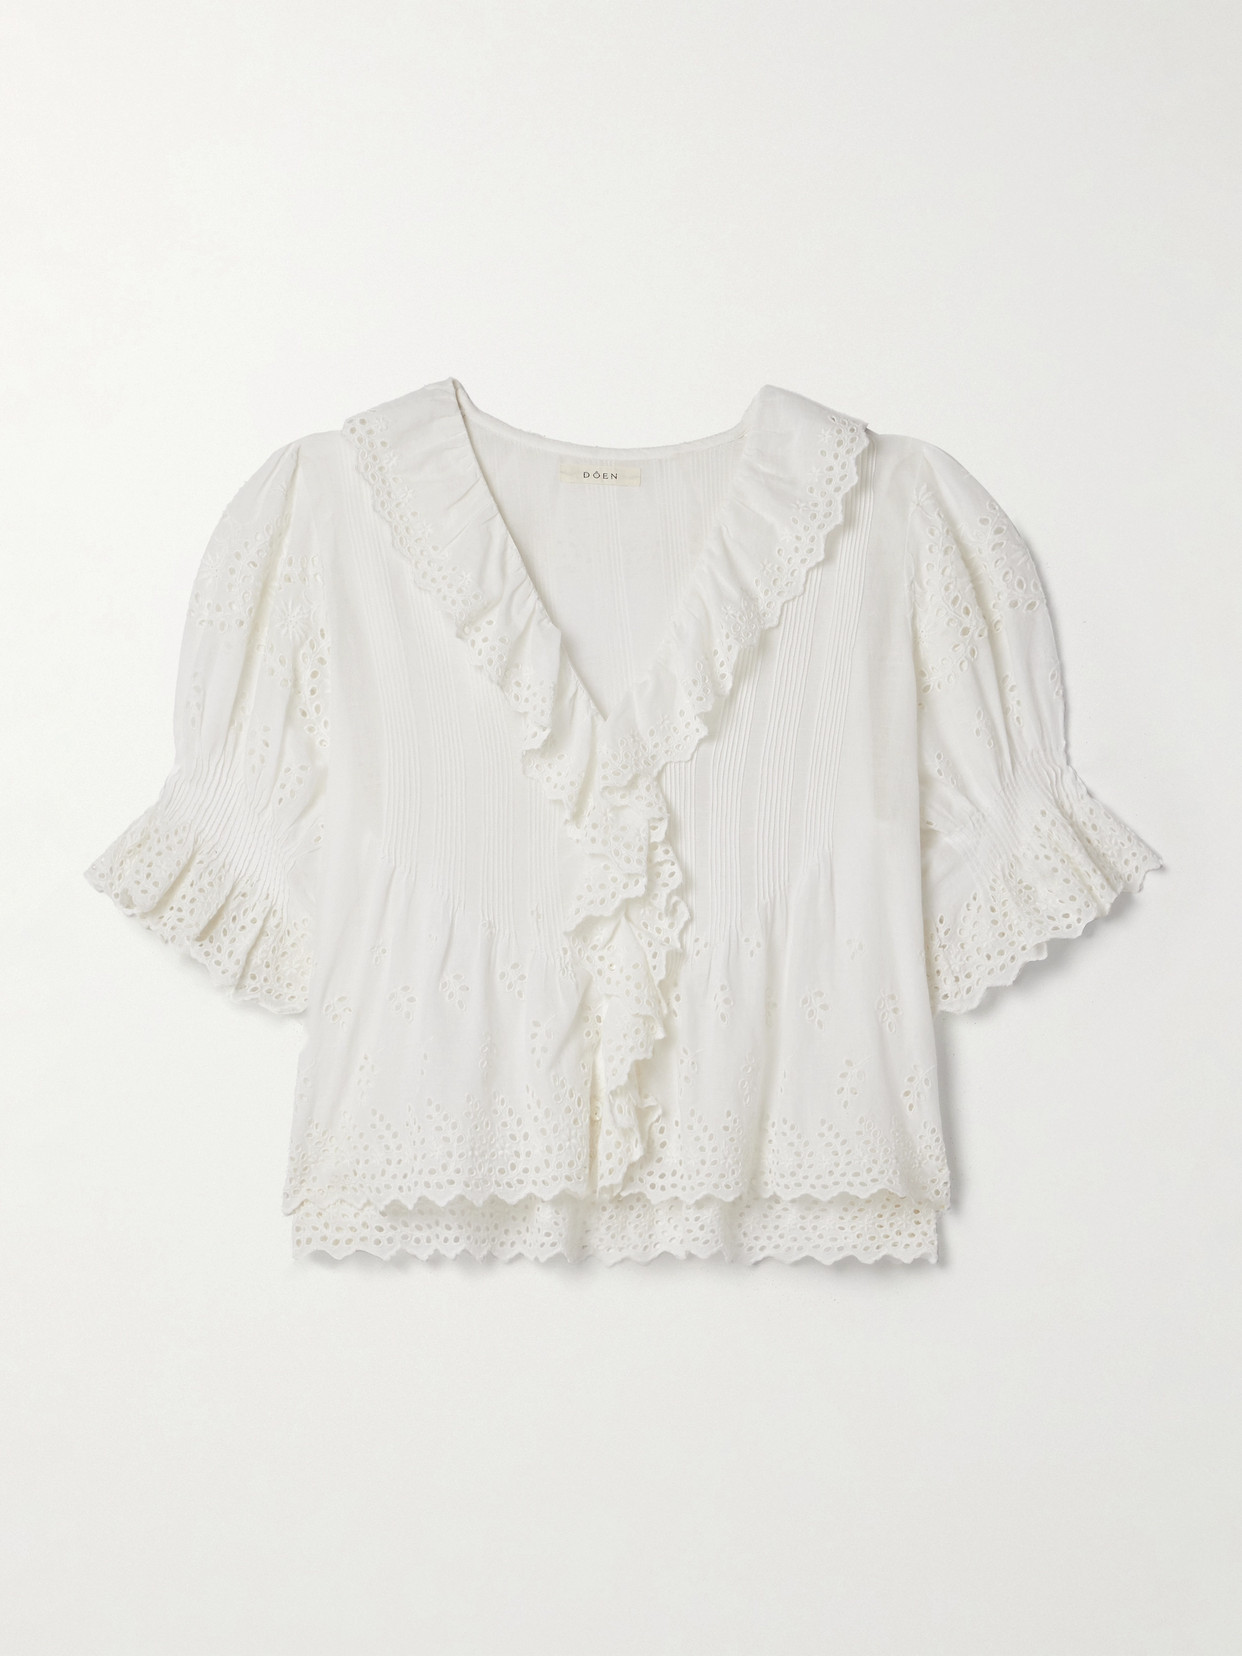 Henri Ruffled Pintucked Broderie Anglaise Cotton Top